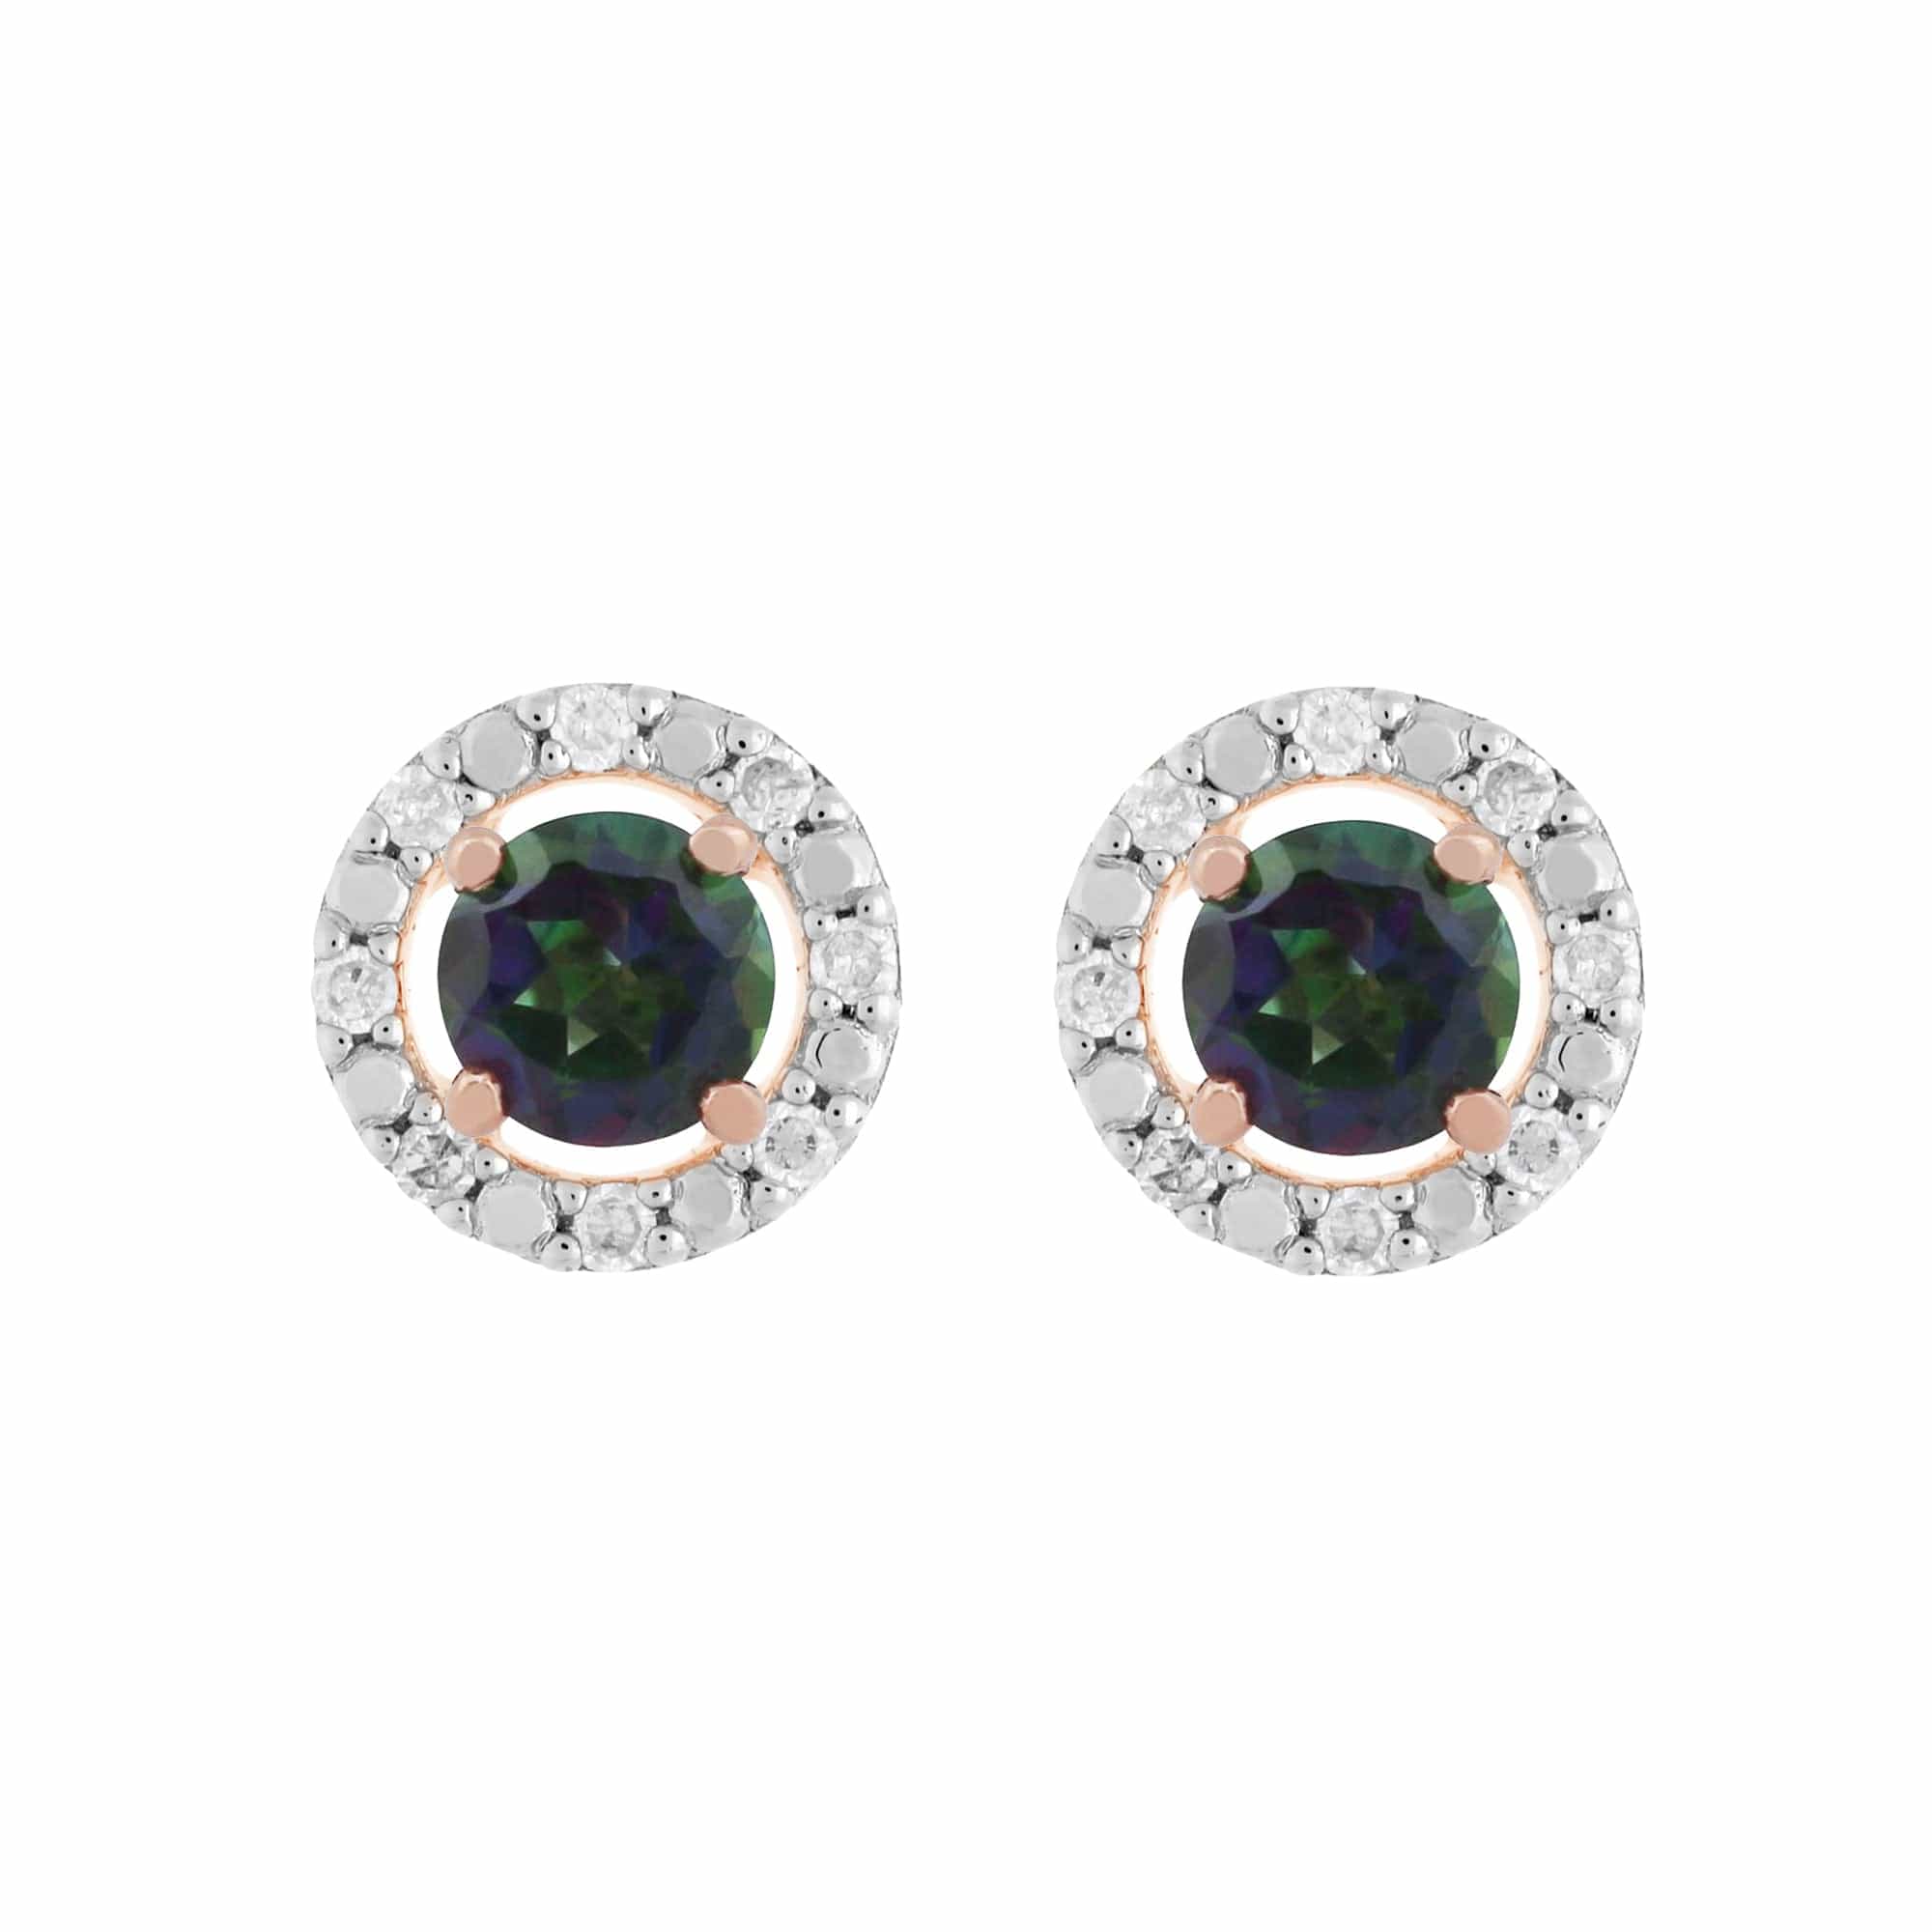 183E4316029-191E0377019 Classic Round Mystic Topaz Stud Earrings with Detachable Diamond Round Ear Jacket in 9ct Rose Gold 1